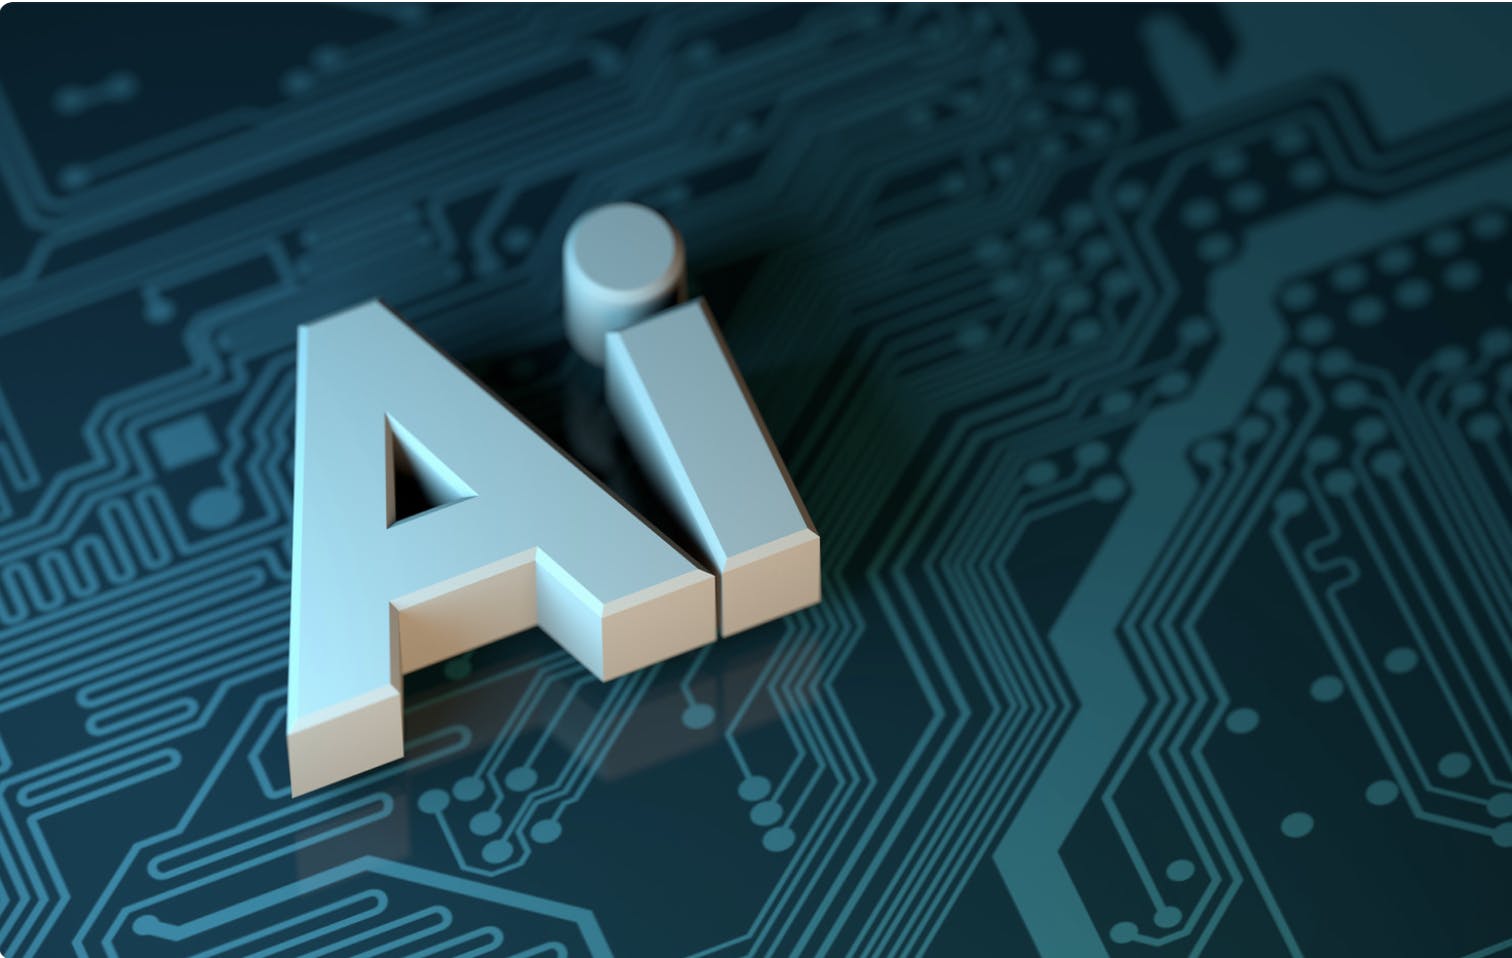 Implementing A.I. in business